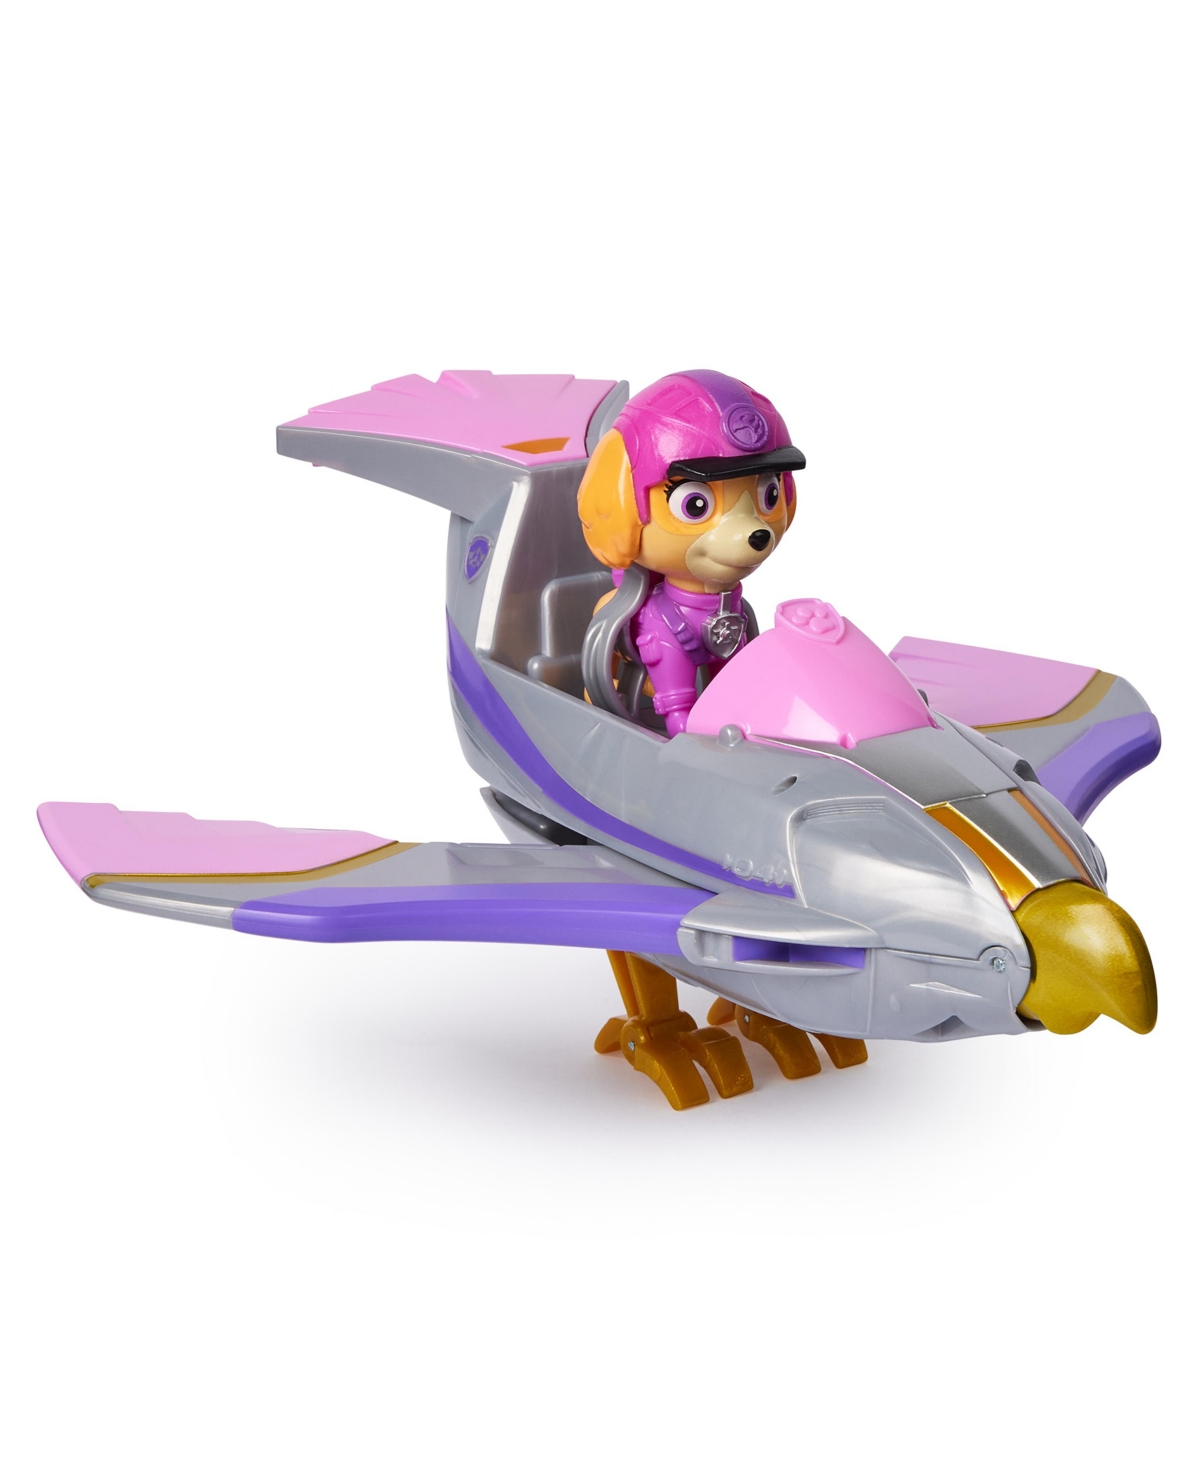 Shop Paw Patrol Jungle Pups, Skye Falcon Vehicle, Toy Jet With Collectible Action Figure In Multi-color